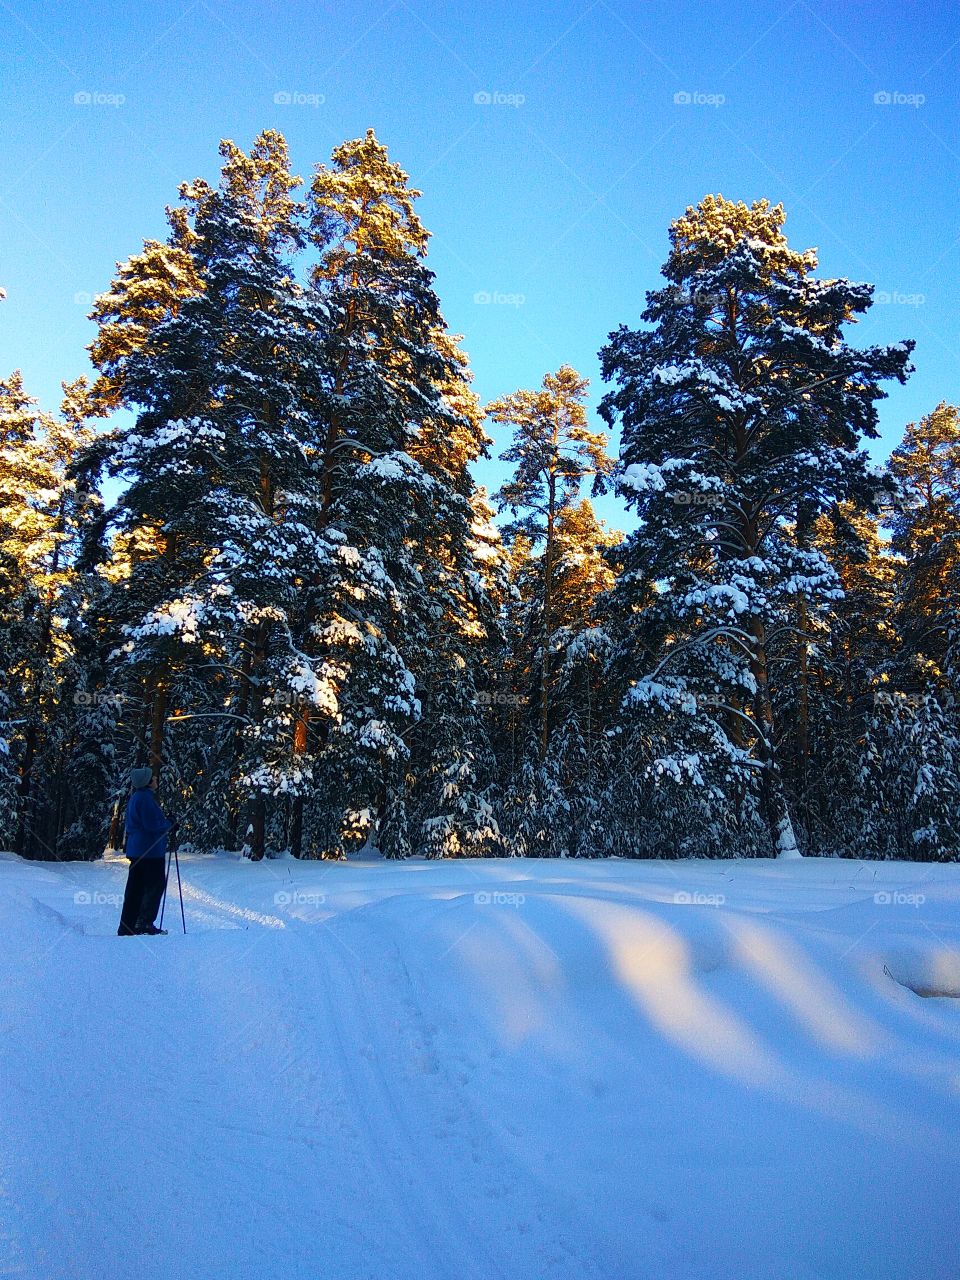 A person standing on snow looking at trees